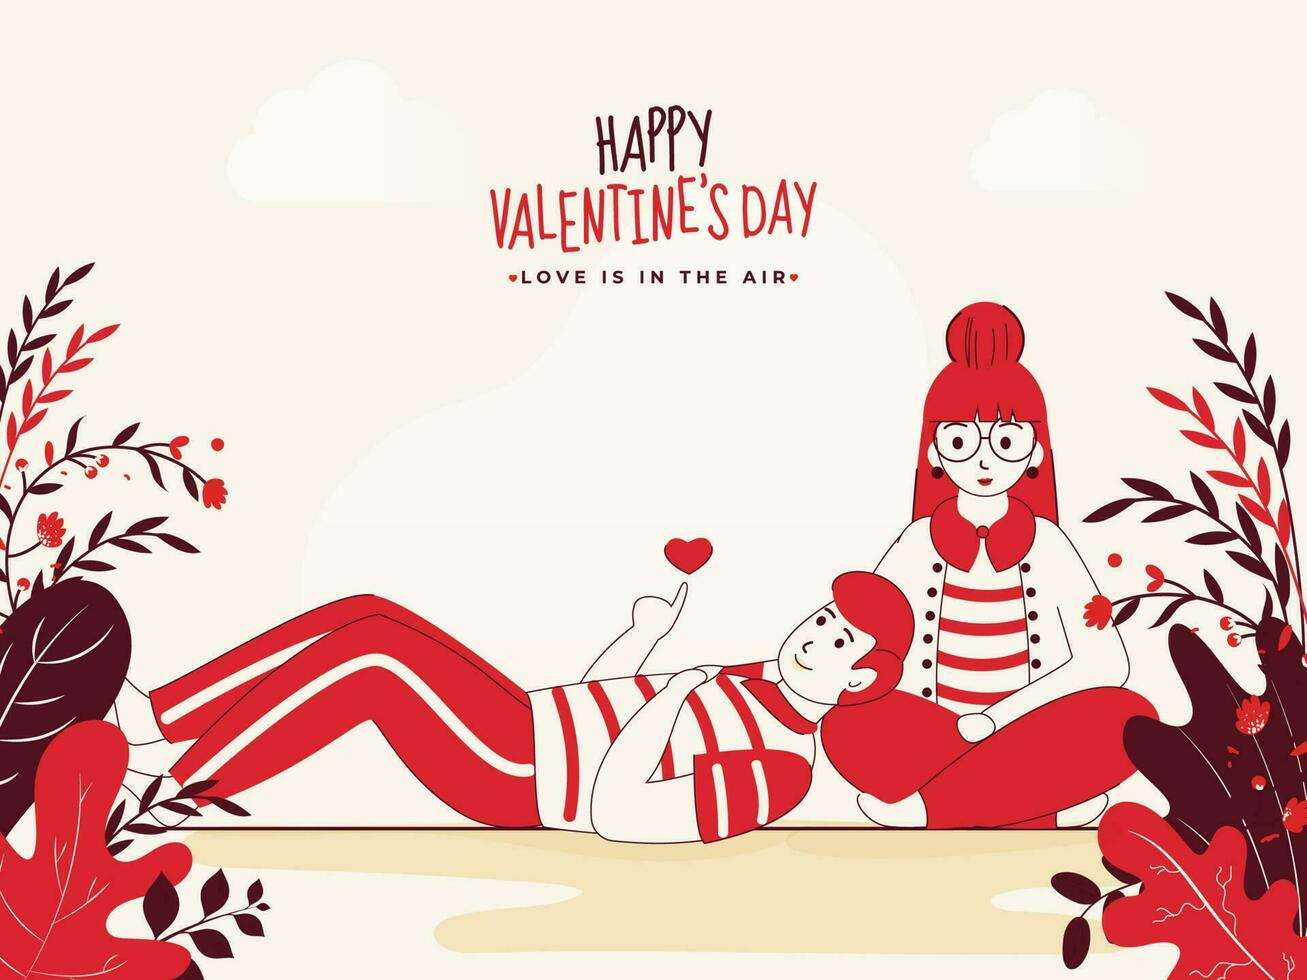 Loving Young Couple Character with Nature View on White Background for Happy Valentine's Day, Love is in the air. vector